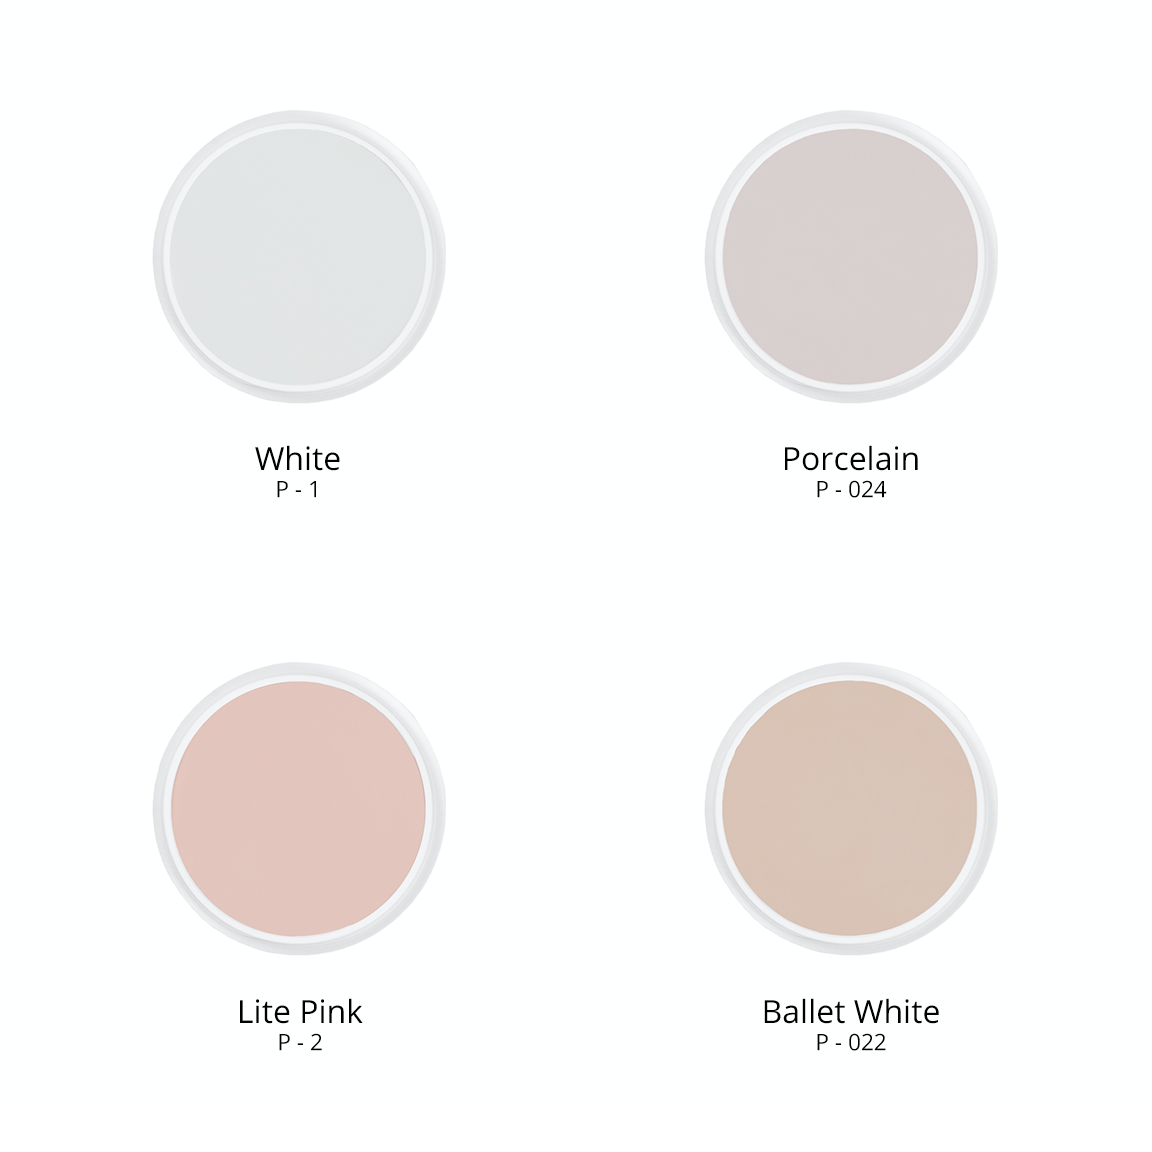 Ben Nye creme foundation in 4 shades, white P - 1 , Porcelain P - 024, Lite Pink P - 2, and Ballet White P - 022.